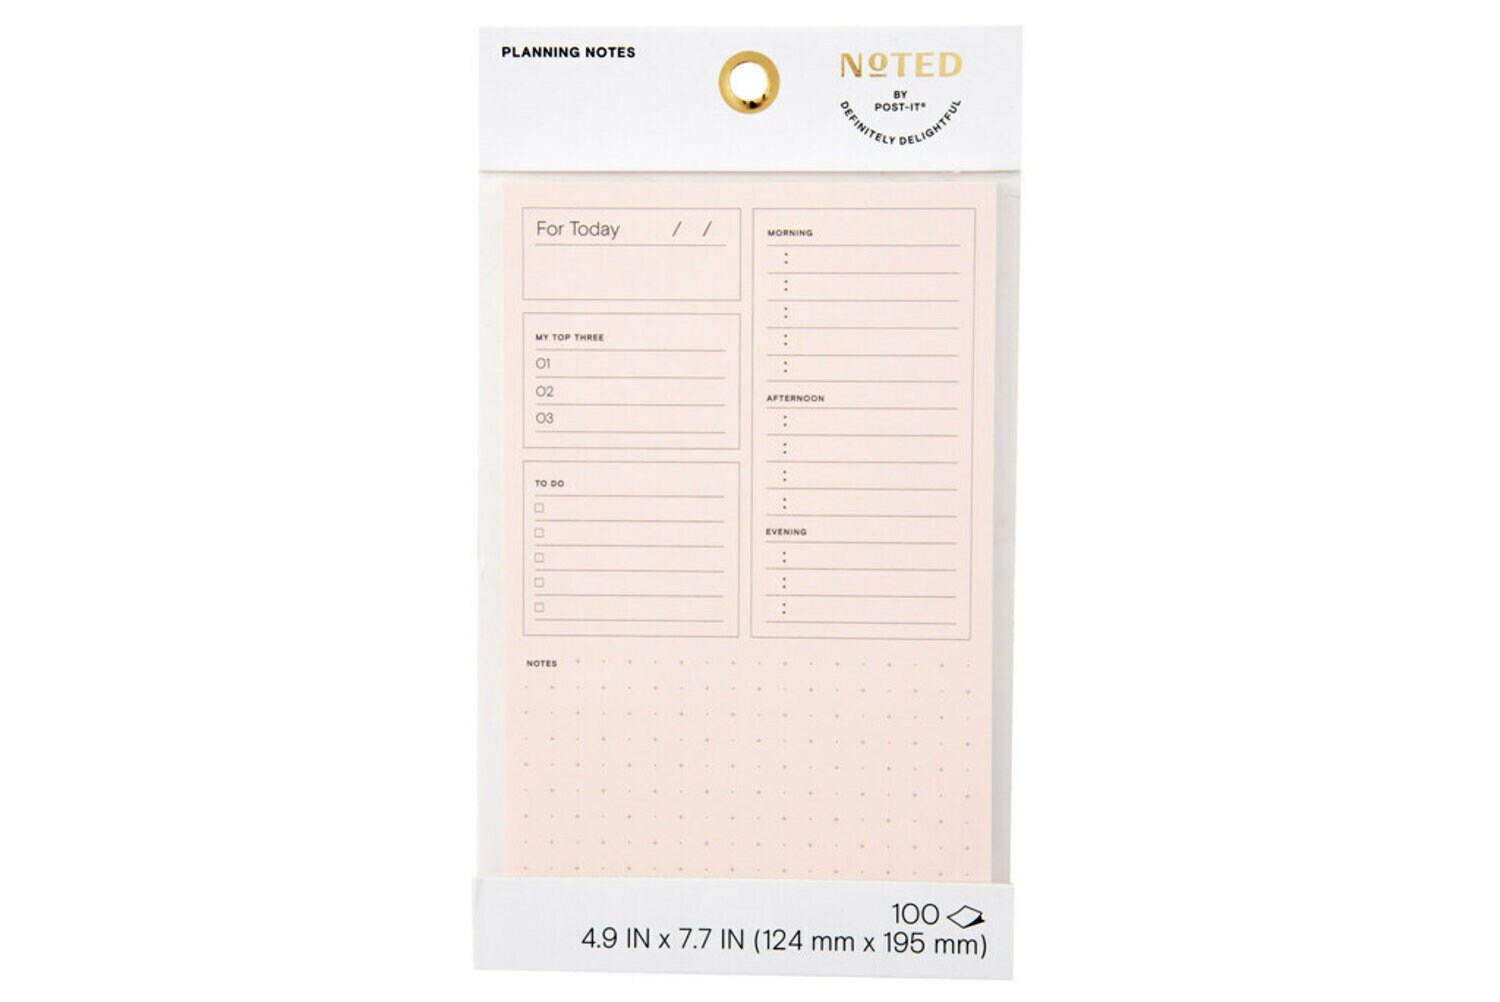 7100305974 - Post-it Planning Notes NTD8-58-1, 4.9 in x 7.7 in (124 mm x 195.5 mm)